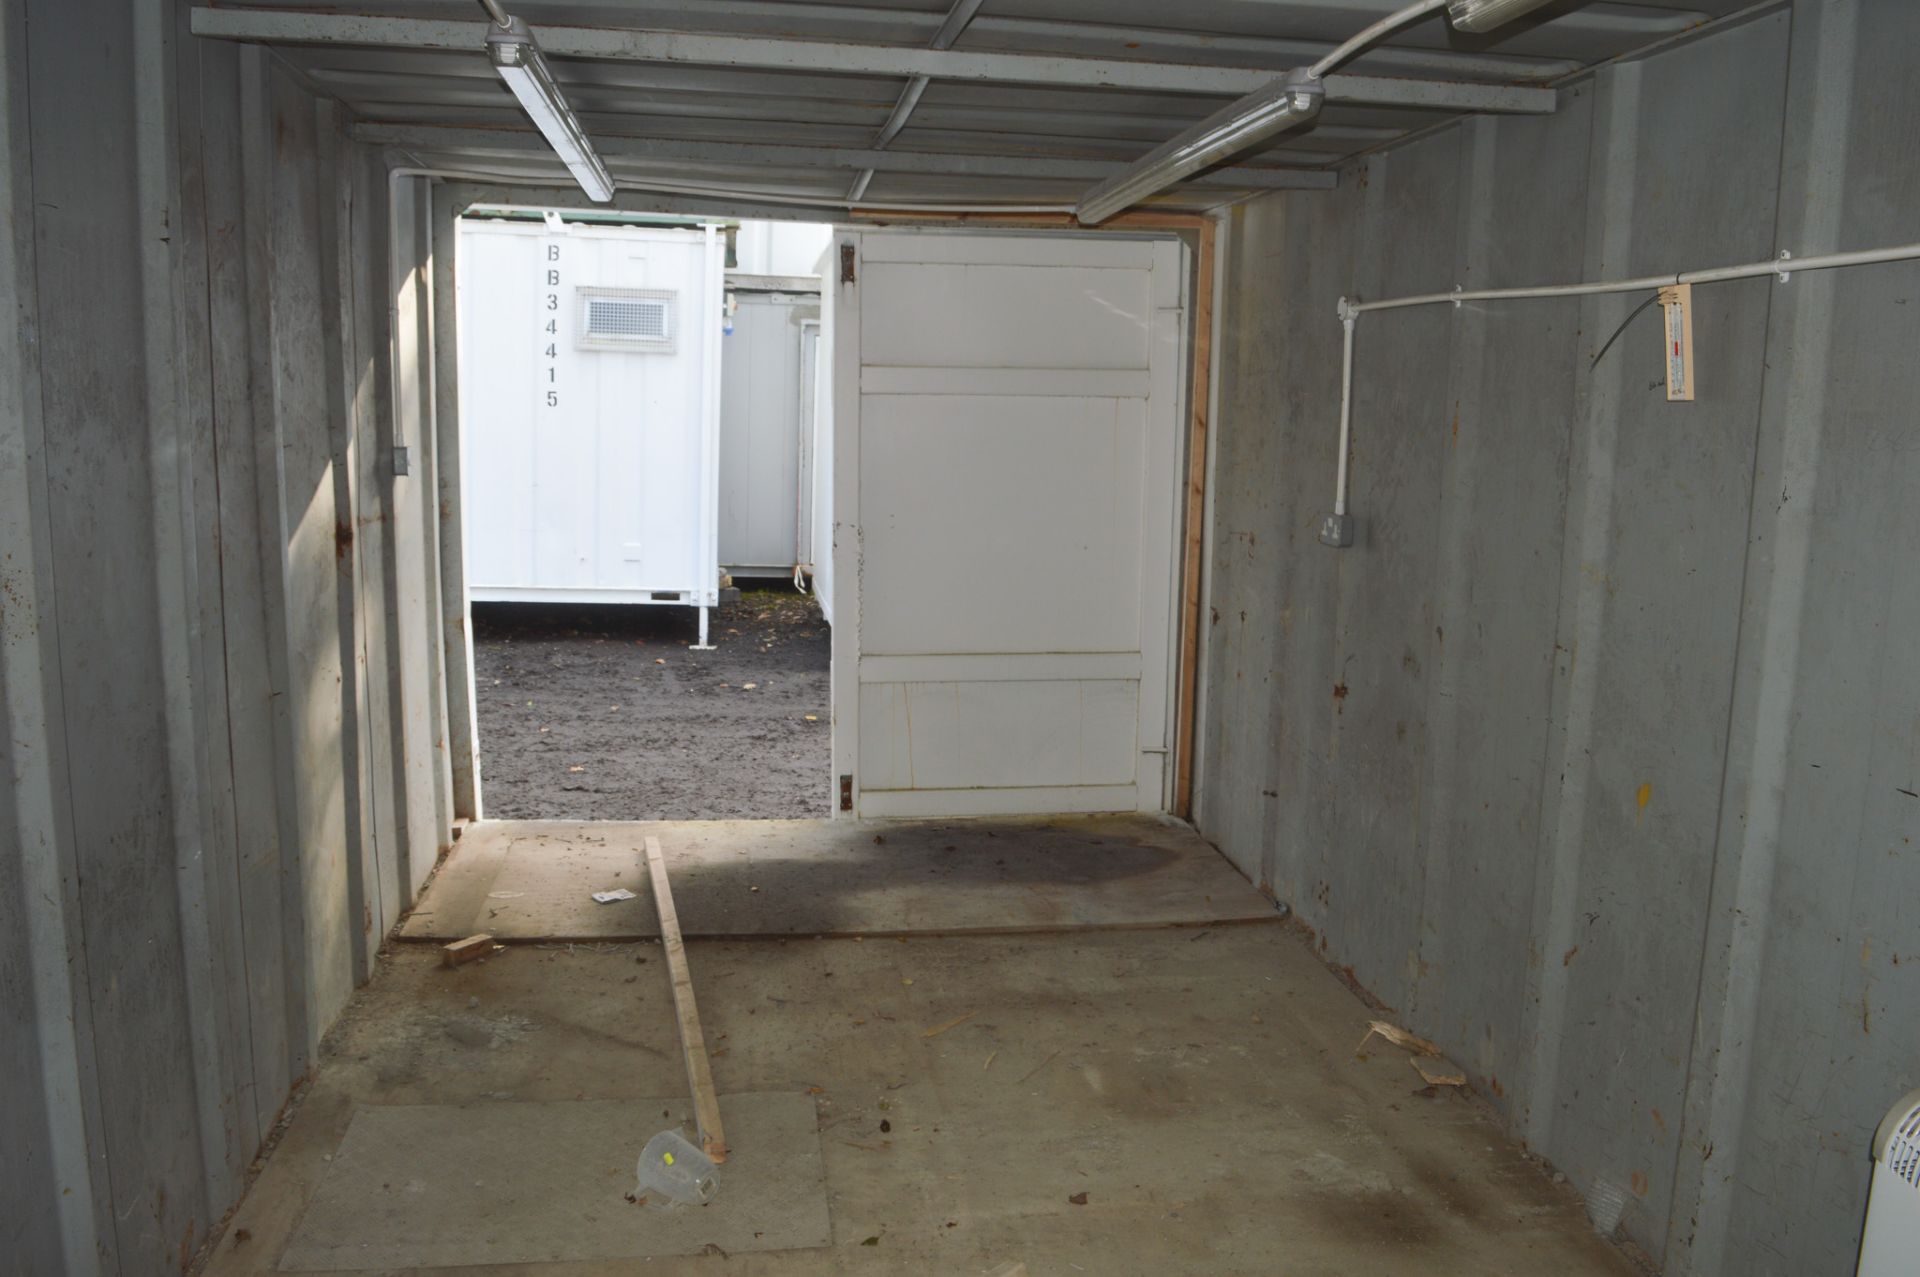 21 ft x 9 ft steel anti vandal shipping container  c/w keys in office  A508242 - Image 6 of 6